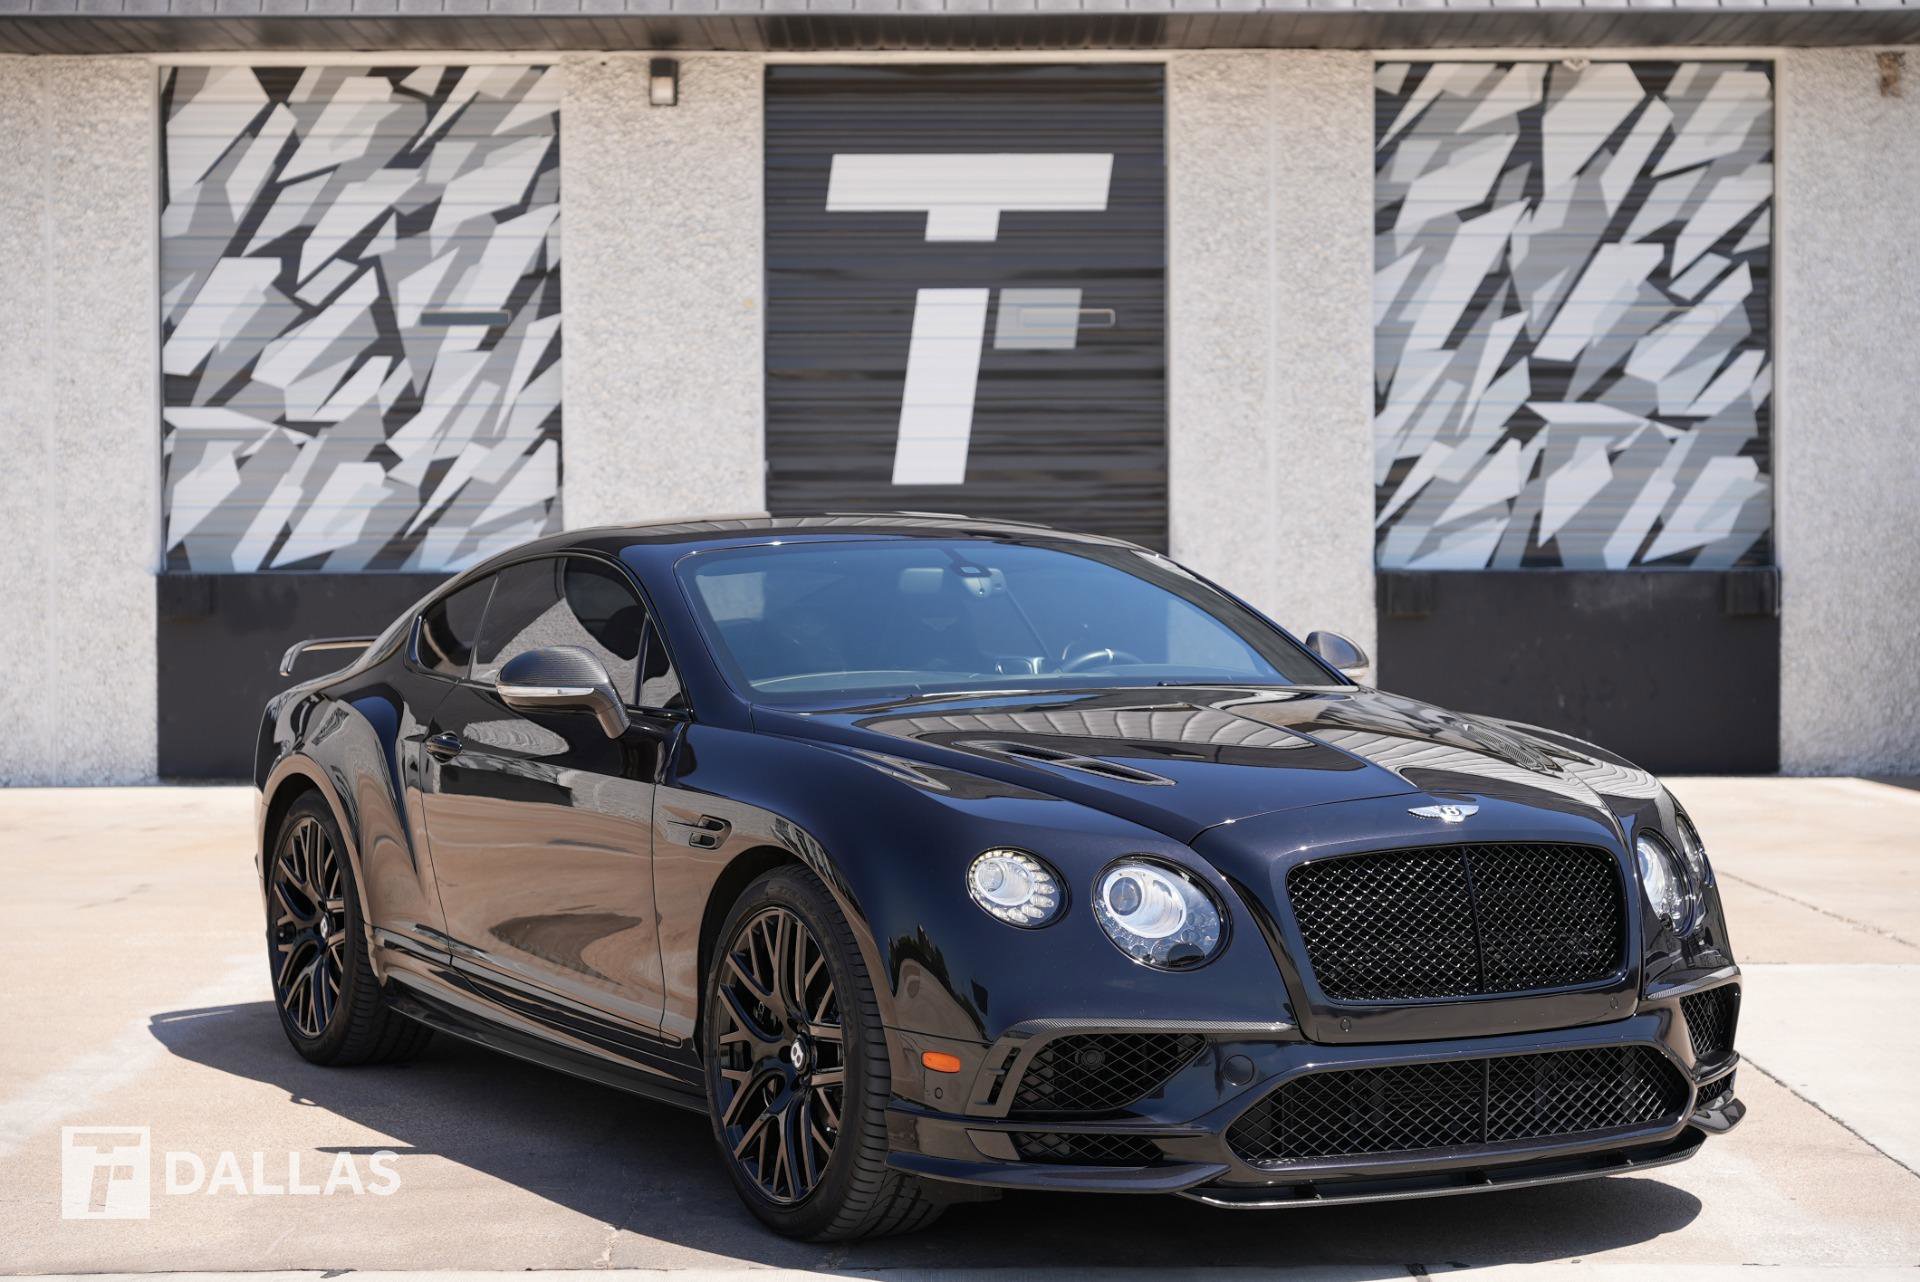 Used Bentley Continental for Sale Right Now - Autotrader